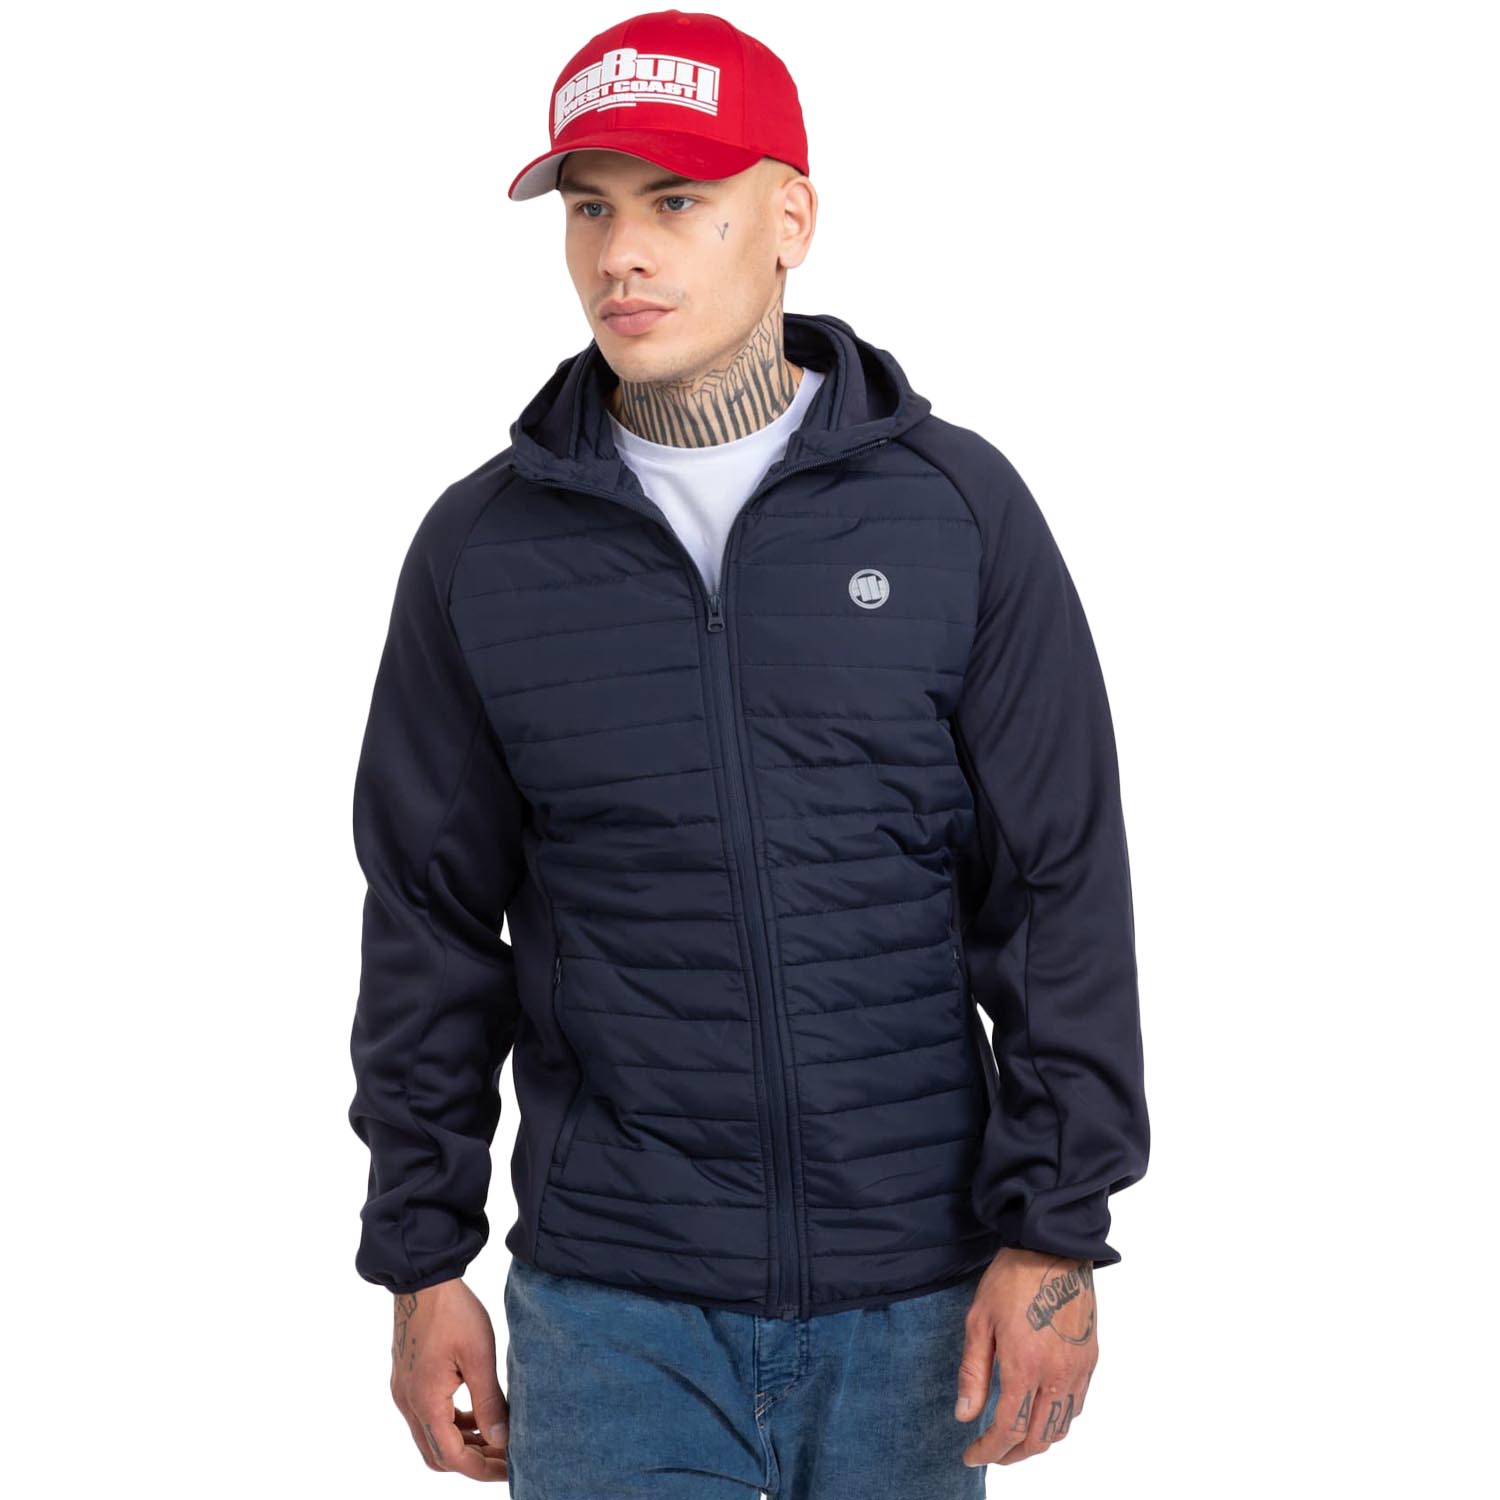 Pit Bull West Coast Jacket, Pacific, navy, S